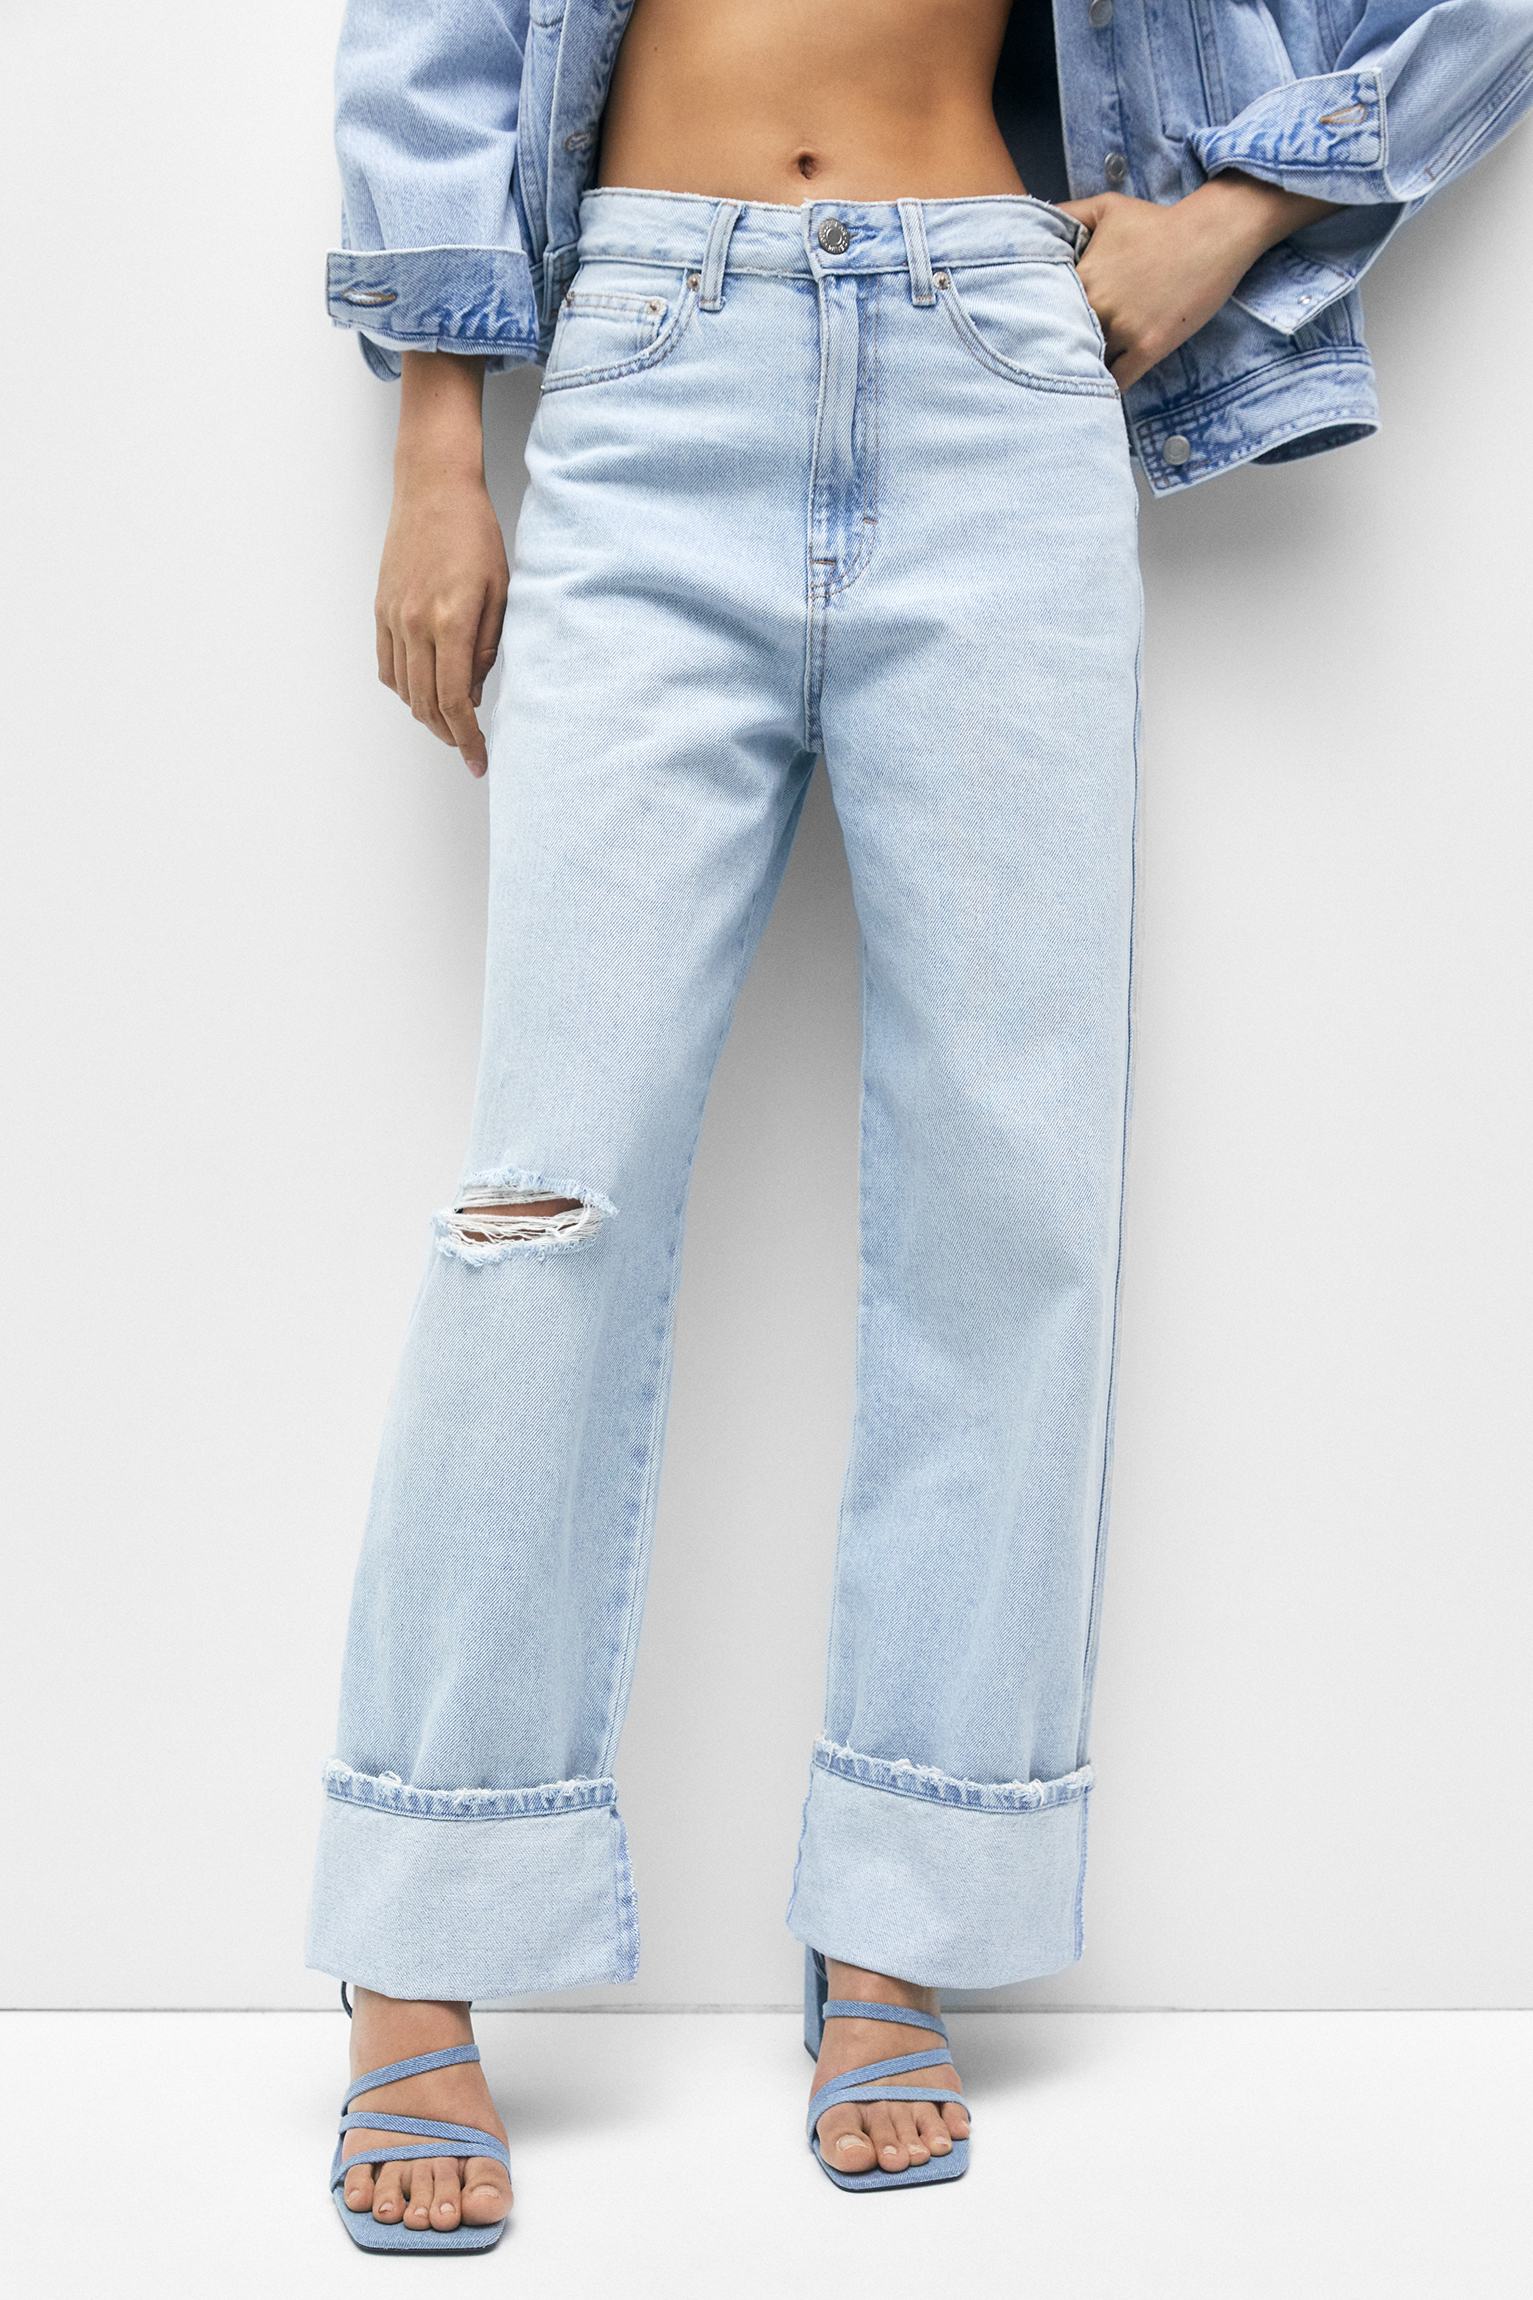 High-rise baggy jeans